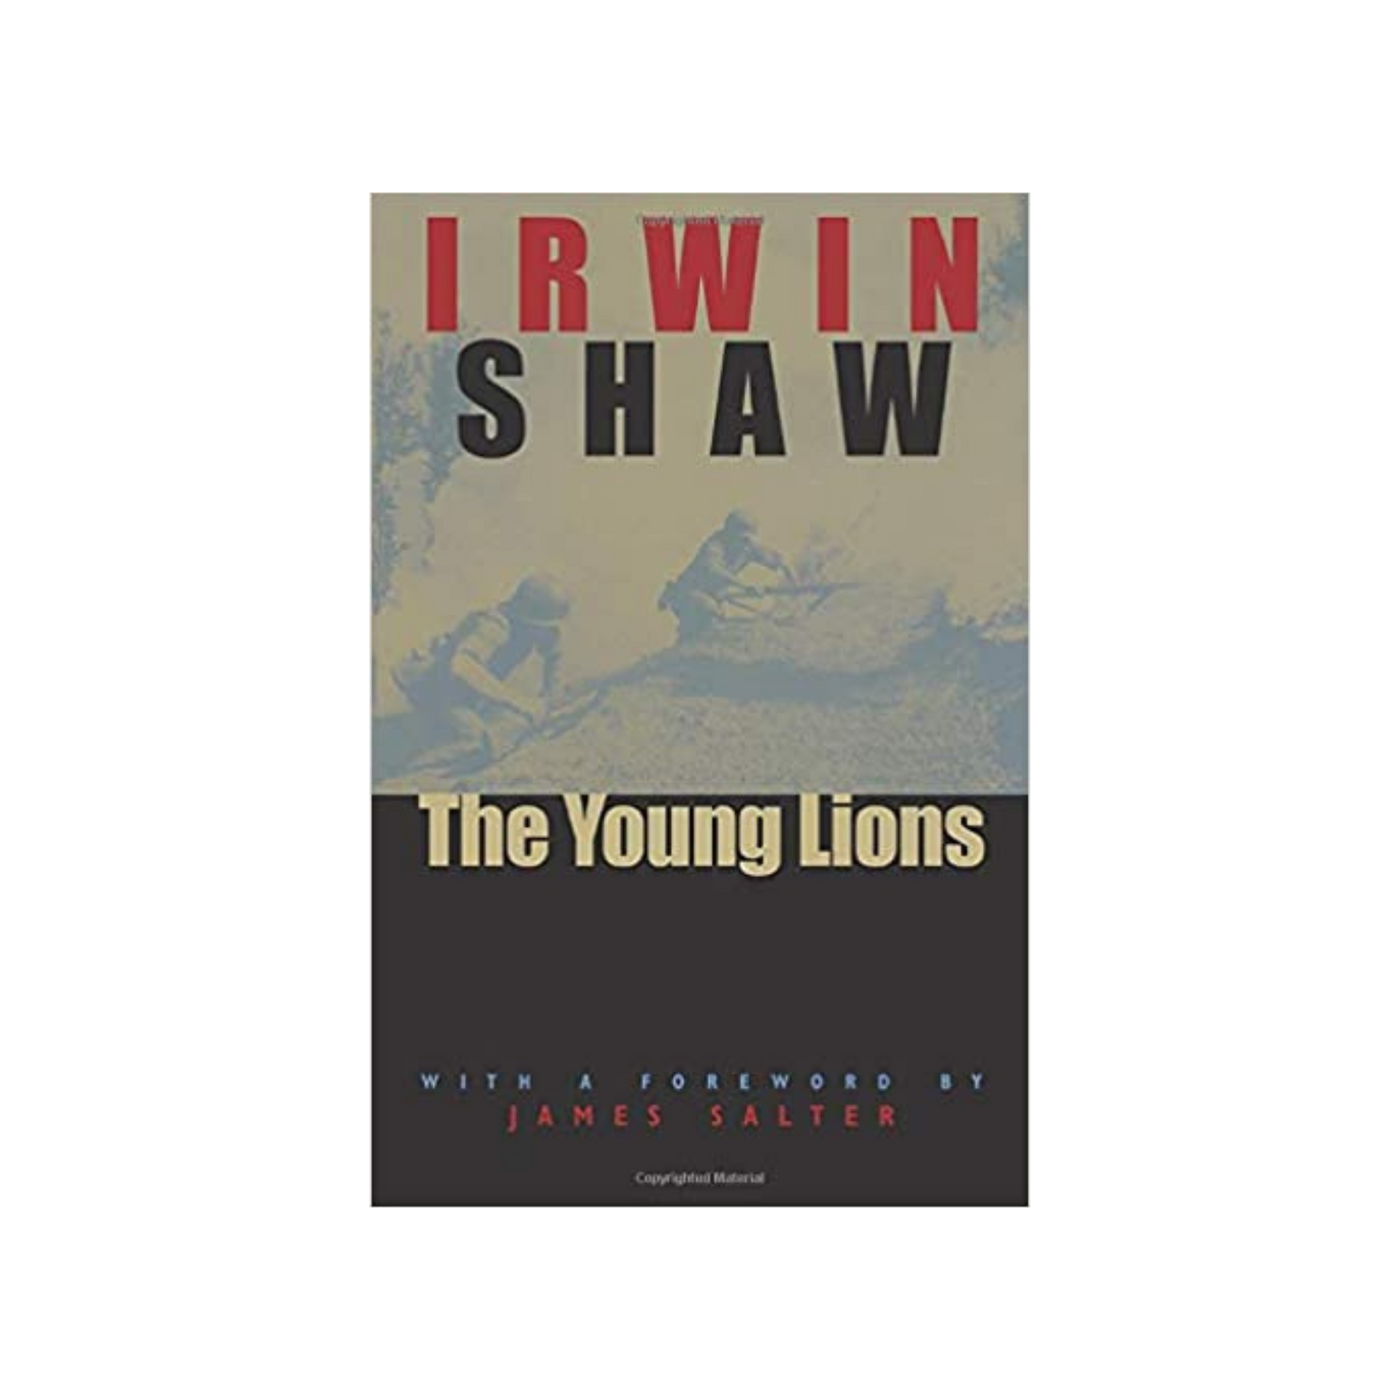 The Young Lions by Irwin Shaw